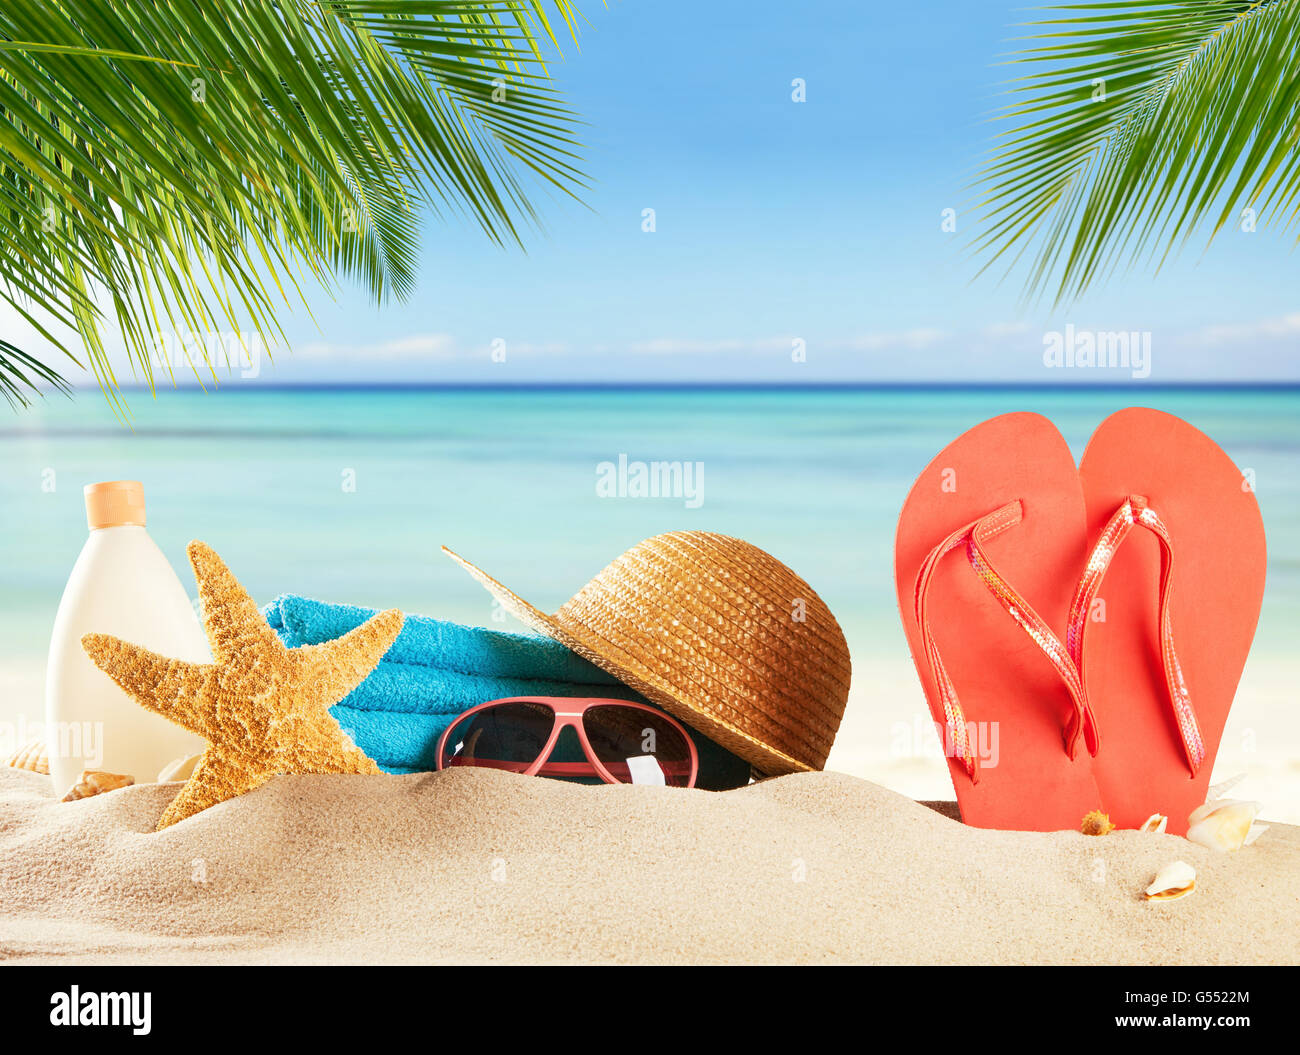 Summer accessories on sandy beach, blur sea on background. Summer exotic relaxation concept. Copyspace for text Stock Photo